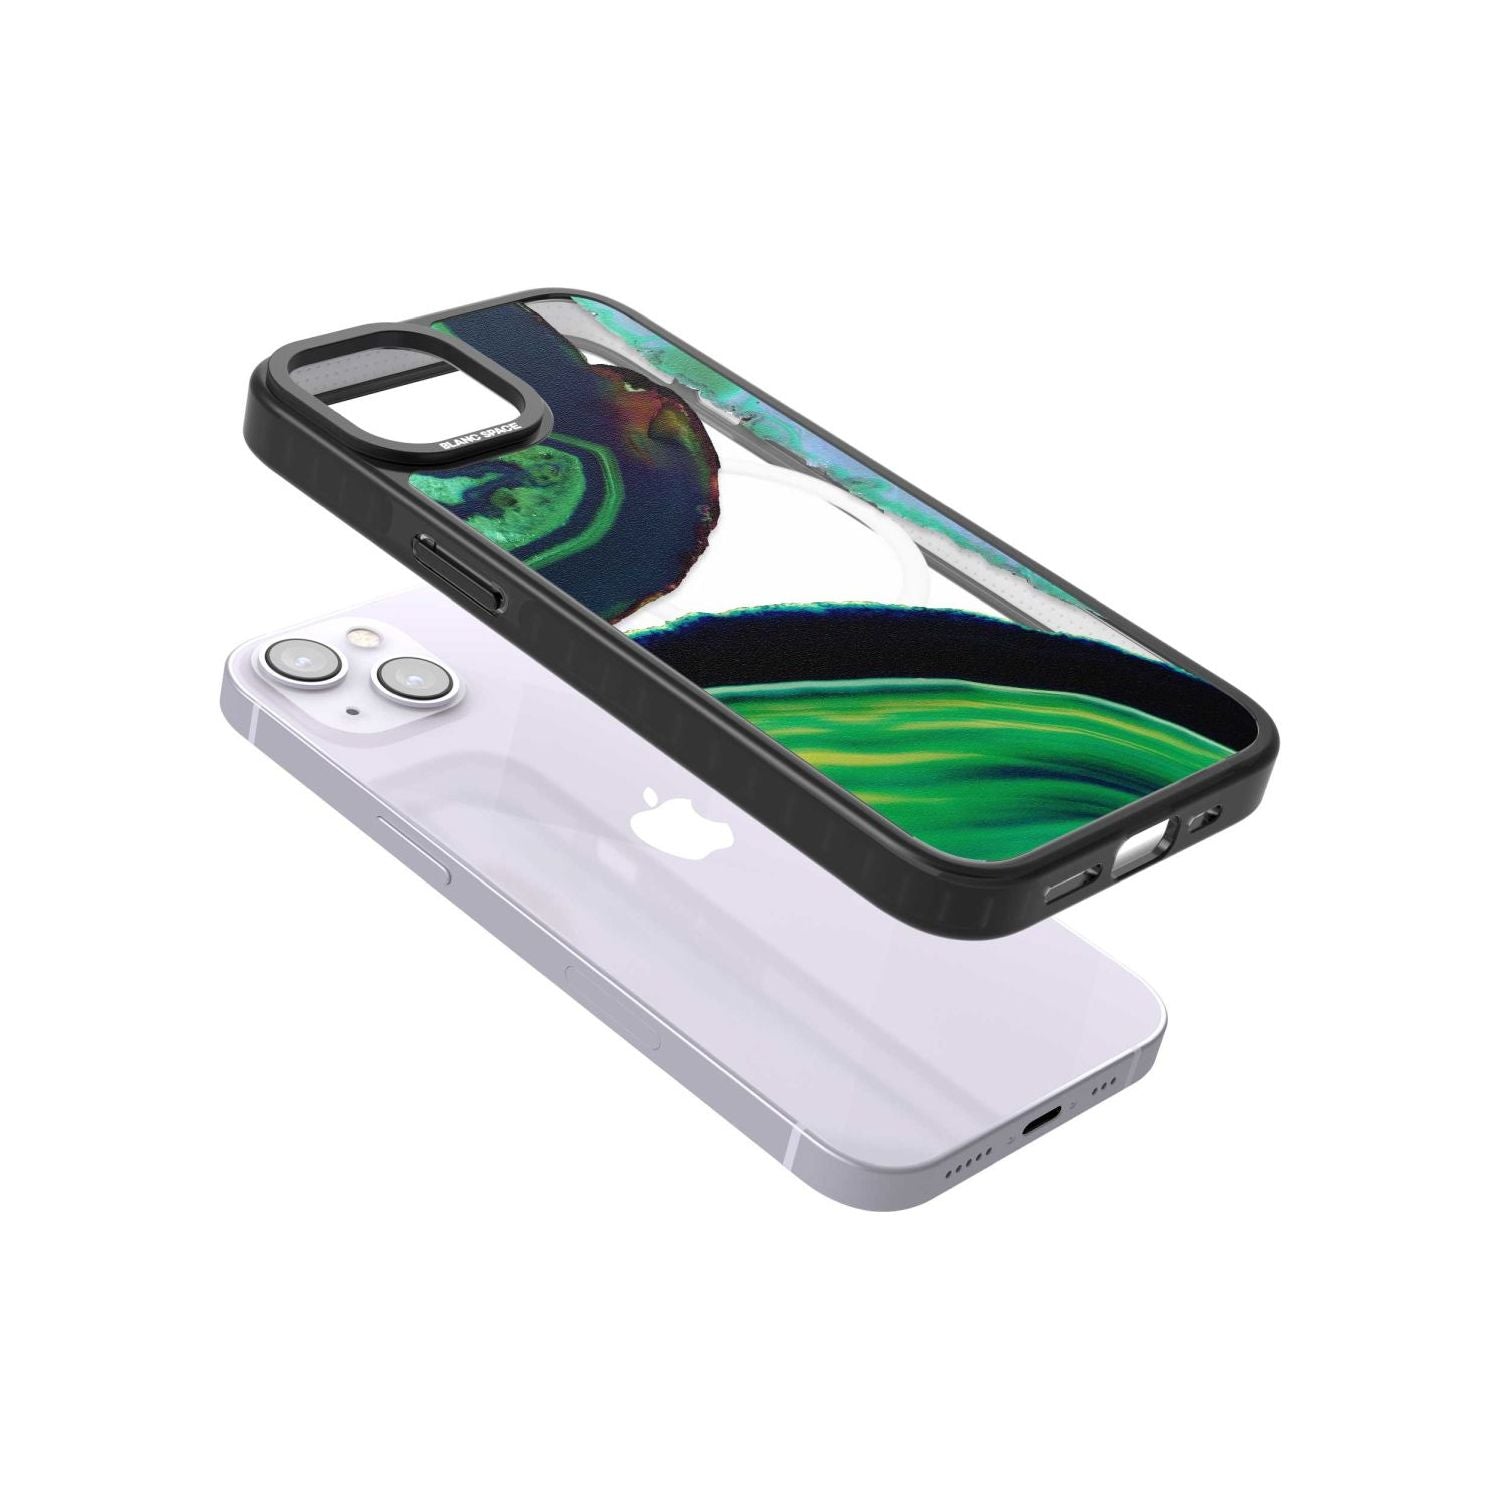 Green & Navy Gemstone Crystal Clear Design Phone Case iPhone 15 Pro Max / Black Impact Case,iPhone 15 Plus / Black Impact Case,iPhone 15 Pro / Black Impact Case,iPhone 15 / Black Impact Case,iPhone 15 Pro Max / Impact Case,iPhone 15 Plus / Impact Case,iPhone 15 Pro / Impact Case,iPhone 15 / Impact Case,iPhone 15 Pro Max / Magsafe Black Impact Case,iPhone 15 Plus / Magsafe Black Impact Case,iPhone 15 Pro / Magsafe Black Impact Case,iPhone 15 / Magsafe Black Impact Case,iPhone 14 Pro Max / Black Impact Case,i